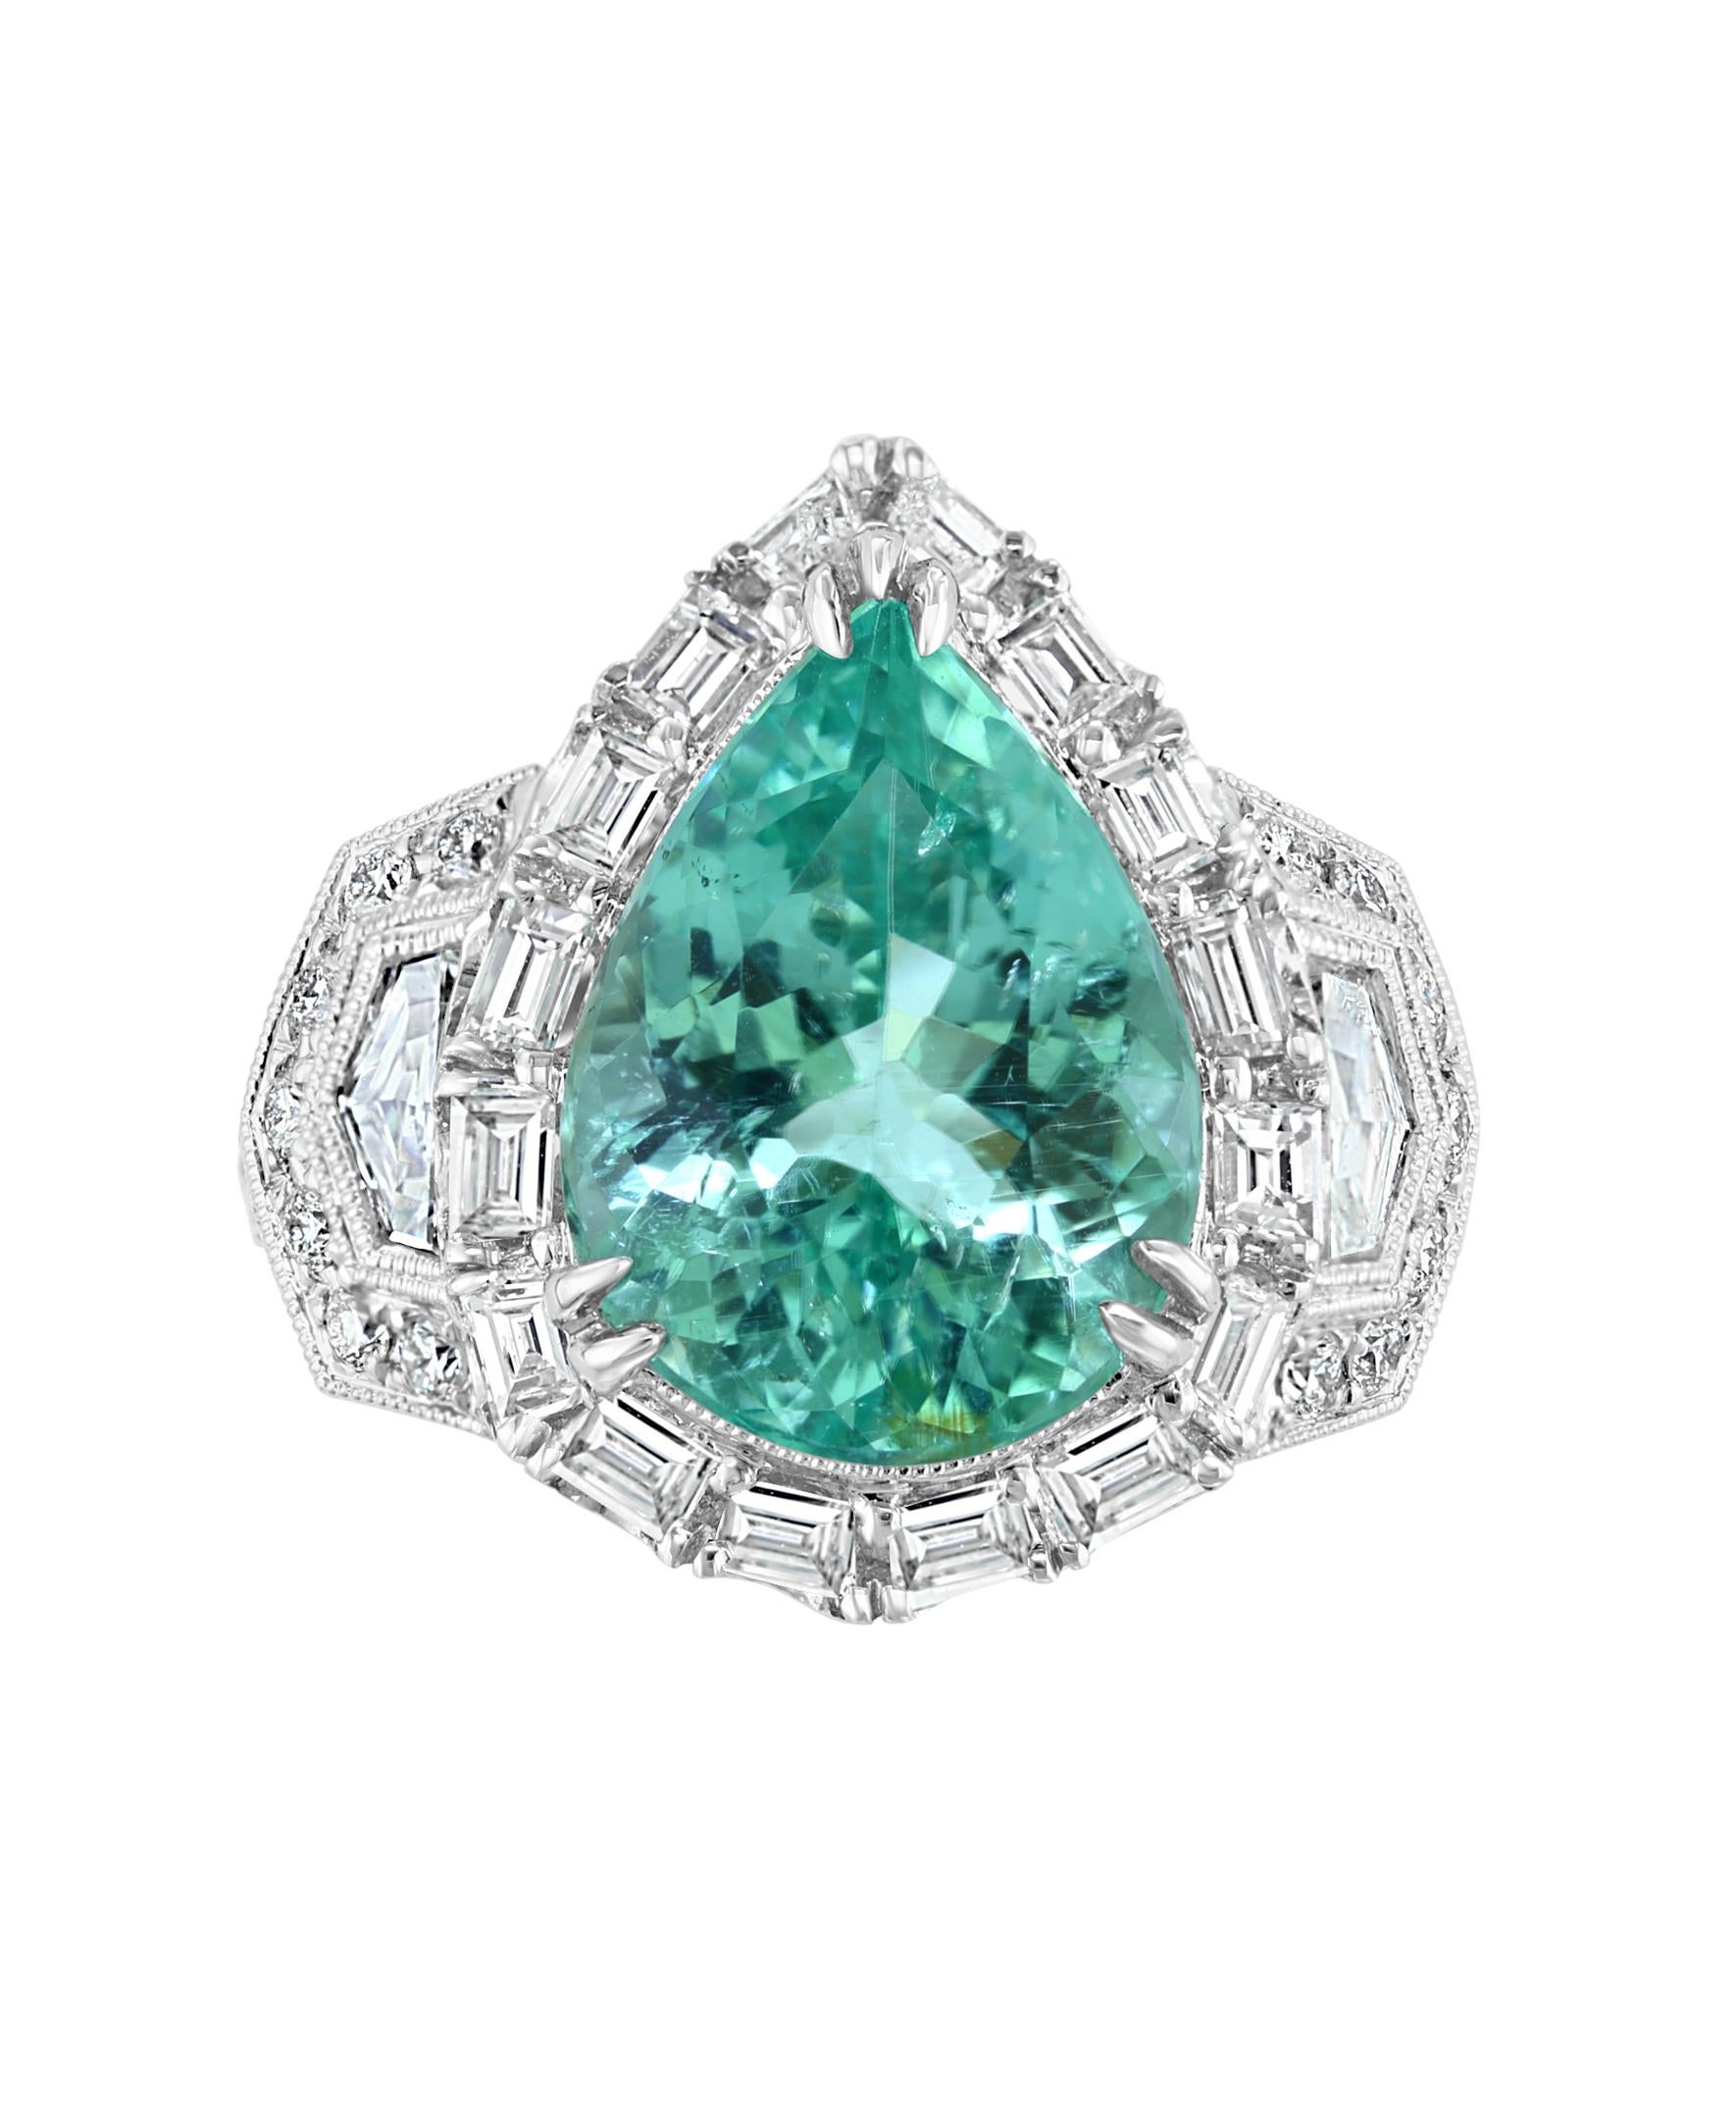 A center stone that shines like a teal blue sea.
This Effy Hematian design ring is set in 18K White gold. Featuring for the center stone a Pear shape Paraiba Tourmaline with a weight of 6.85 ct.
Surrounded by round cut Diamonds weighing 0.50 ct.,